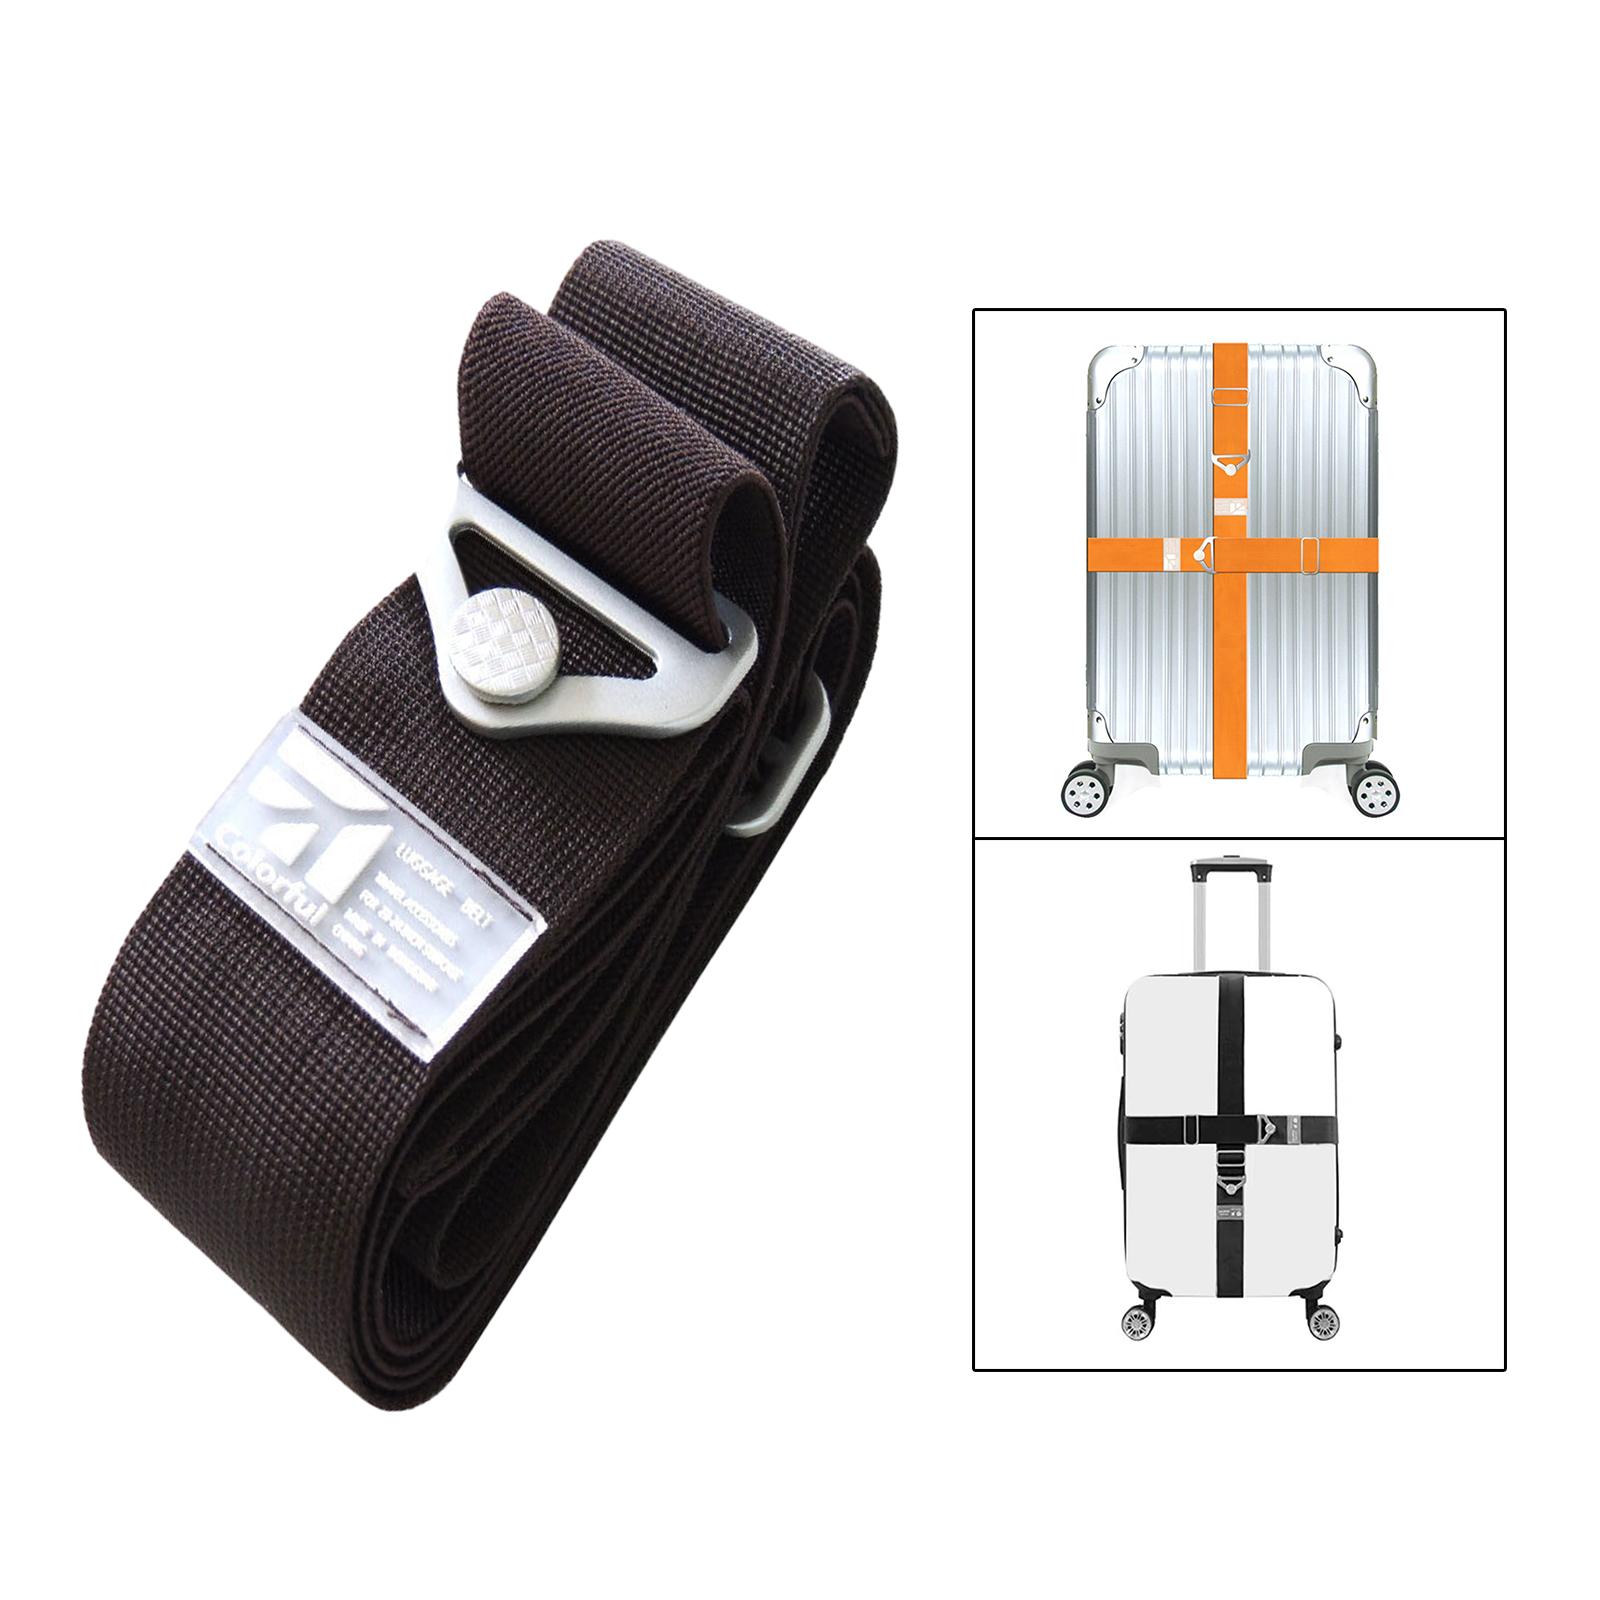 Luggage Strap Multipurpose Travel Packing Straps for Backpack Bags Rucksacks Coffee